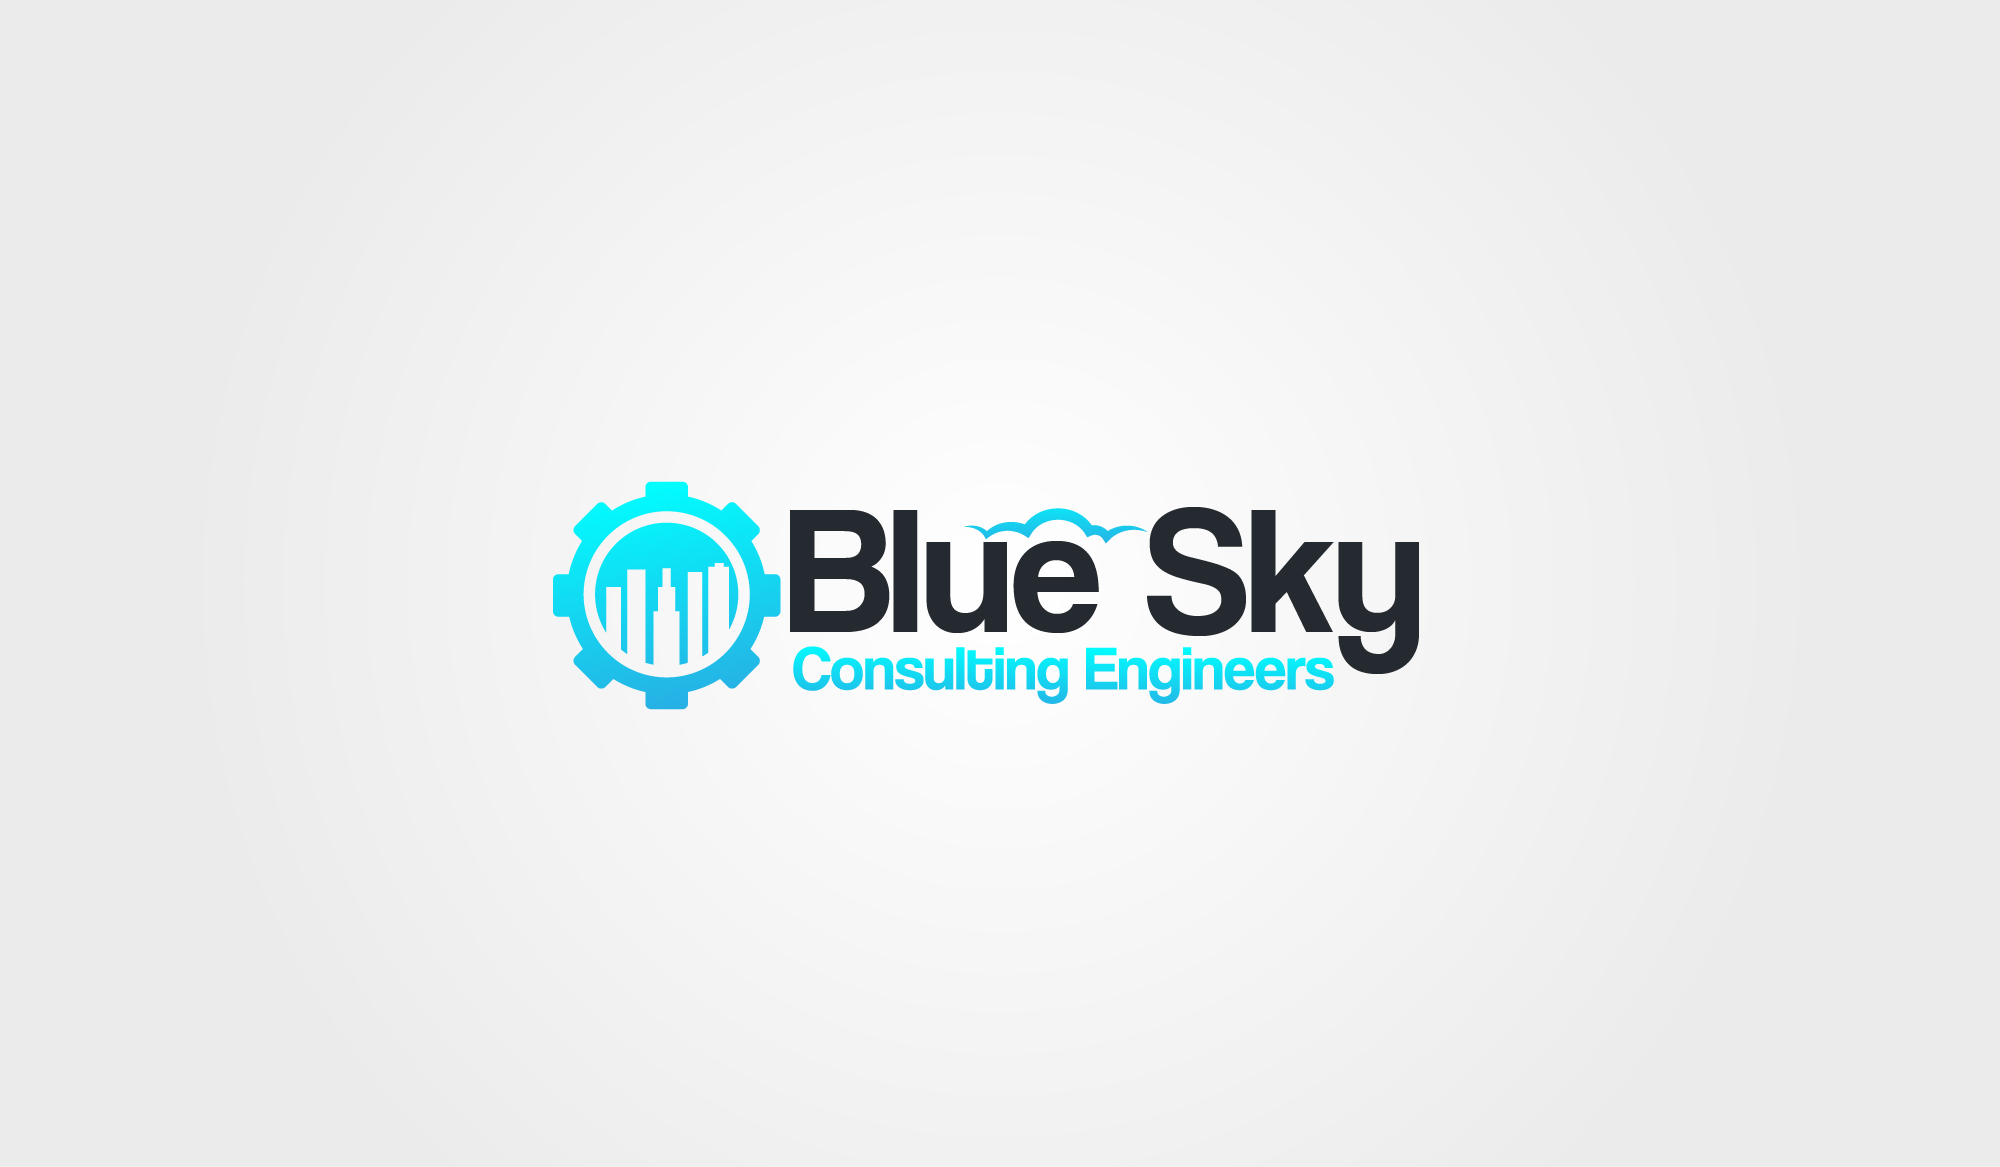 Blue Sky Consulting Engineers